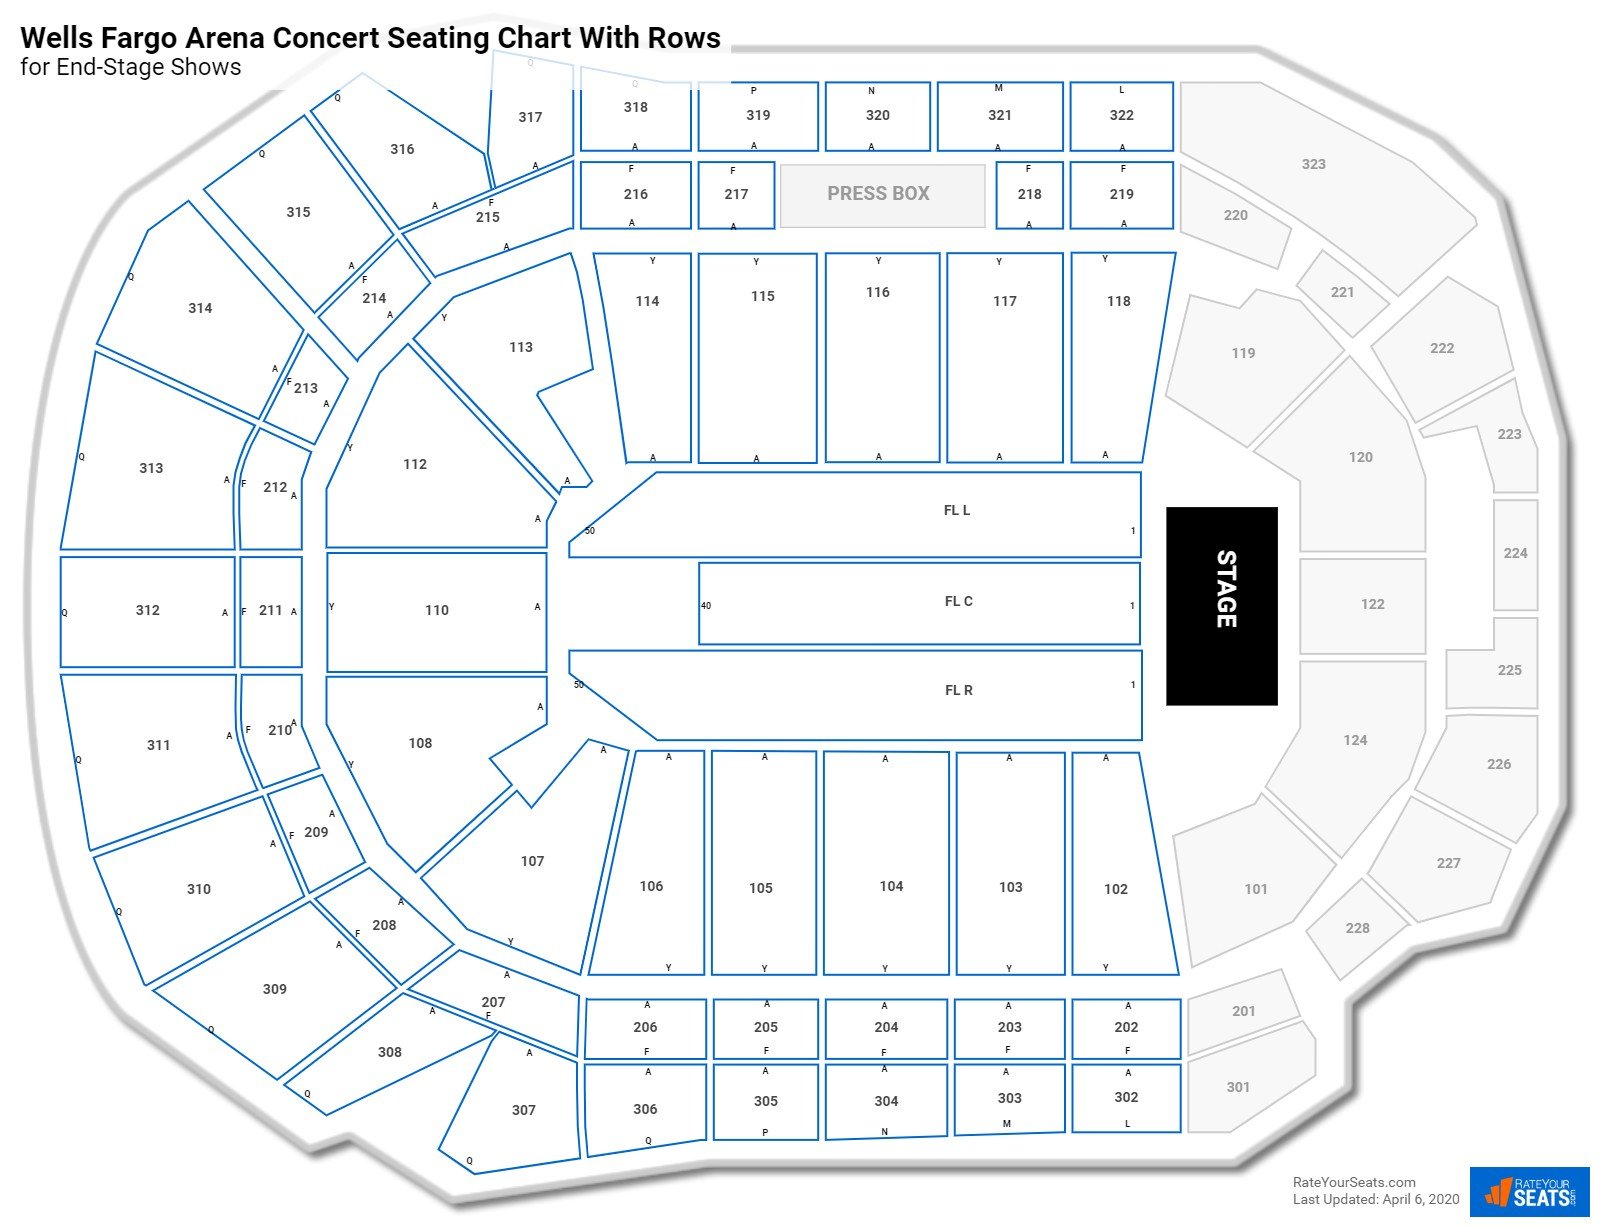 Wells Fargo Arena seating chart with row numbers